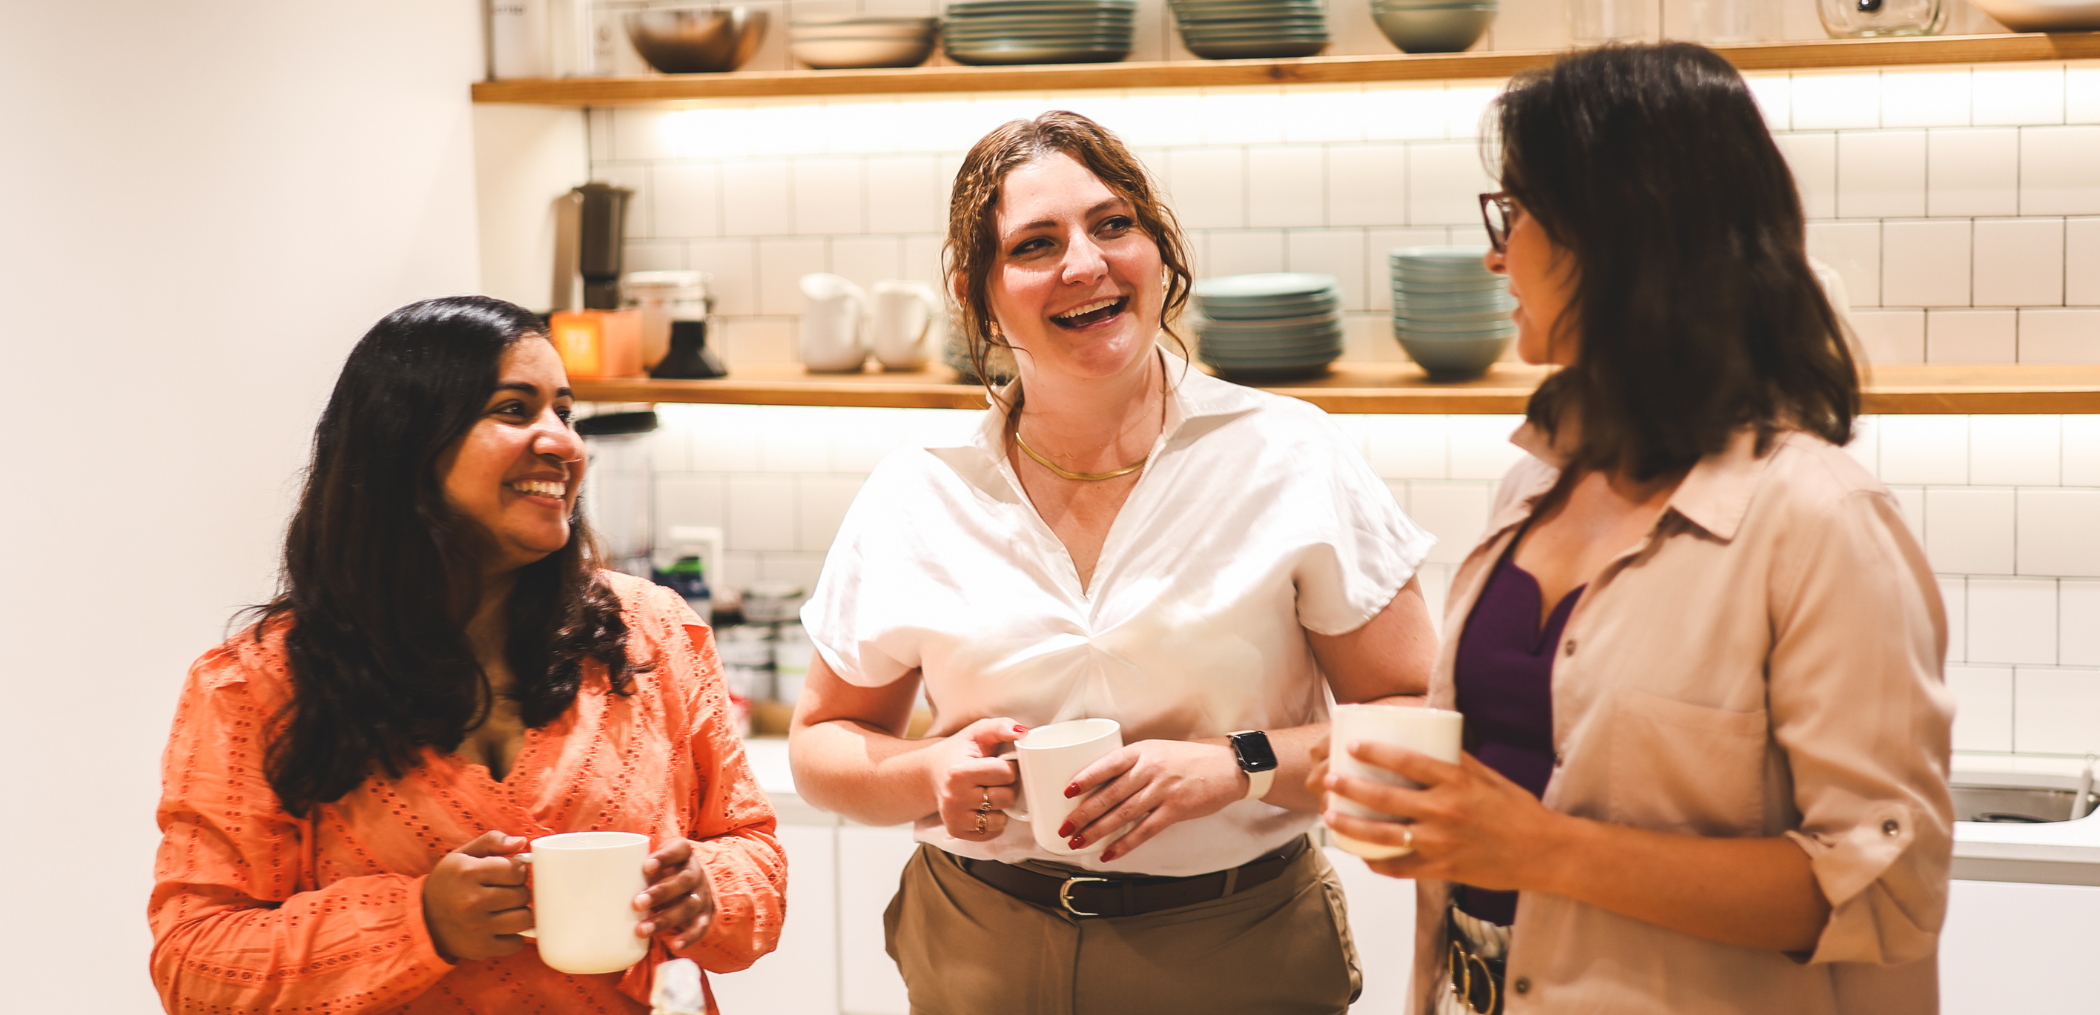 3 women stand together with coffee mugs in hand having a conversations